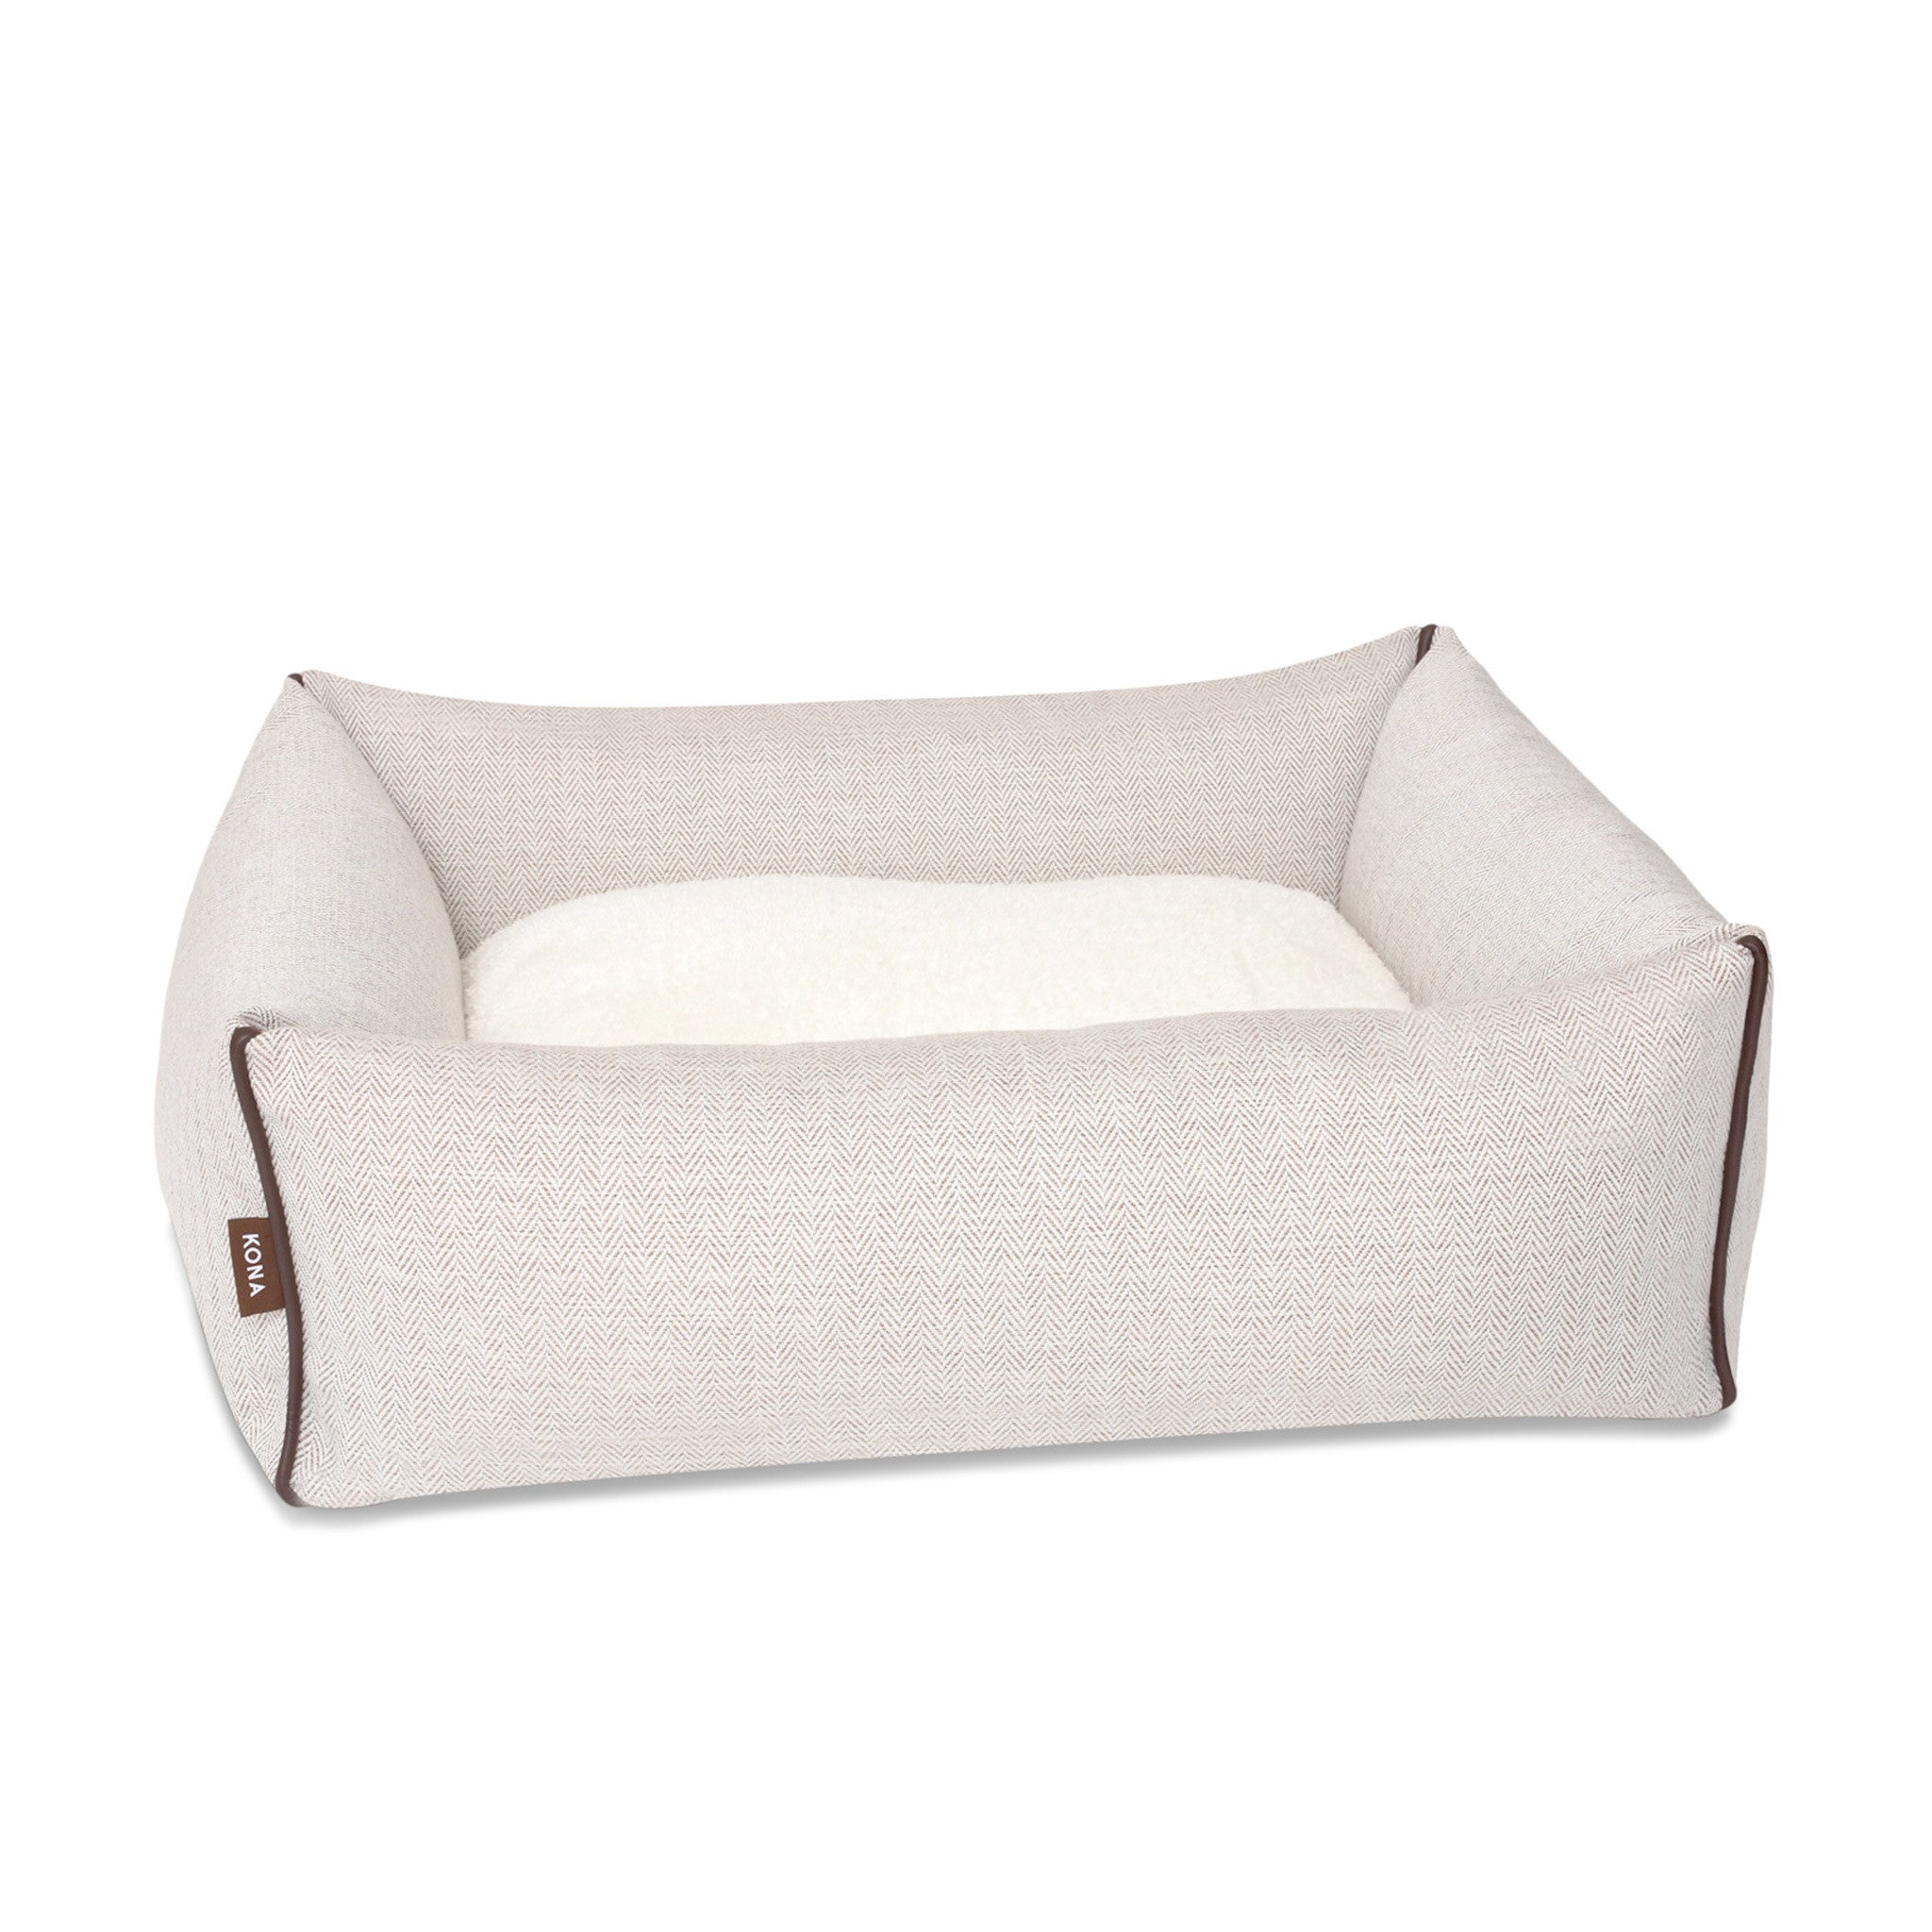 KONA CAVE® - Your Dog Needs This Travel Bed for Security and Comfort